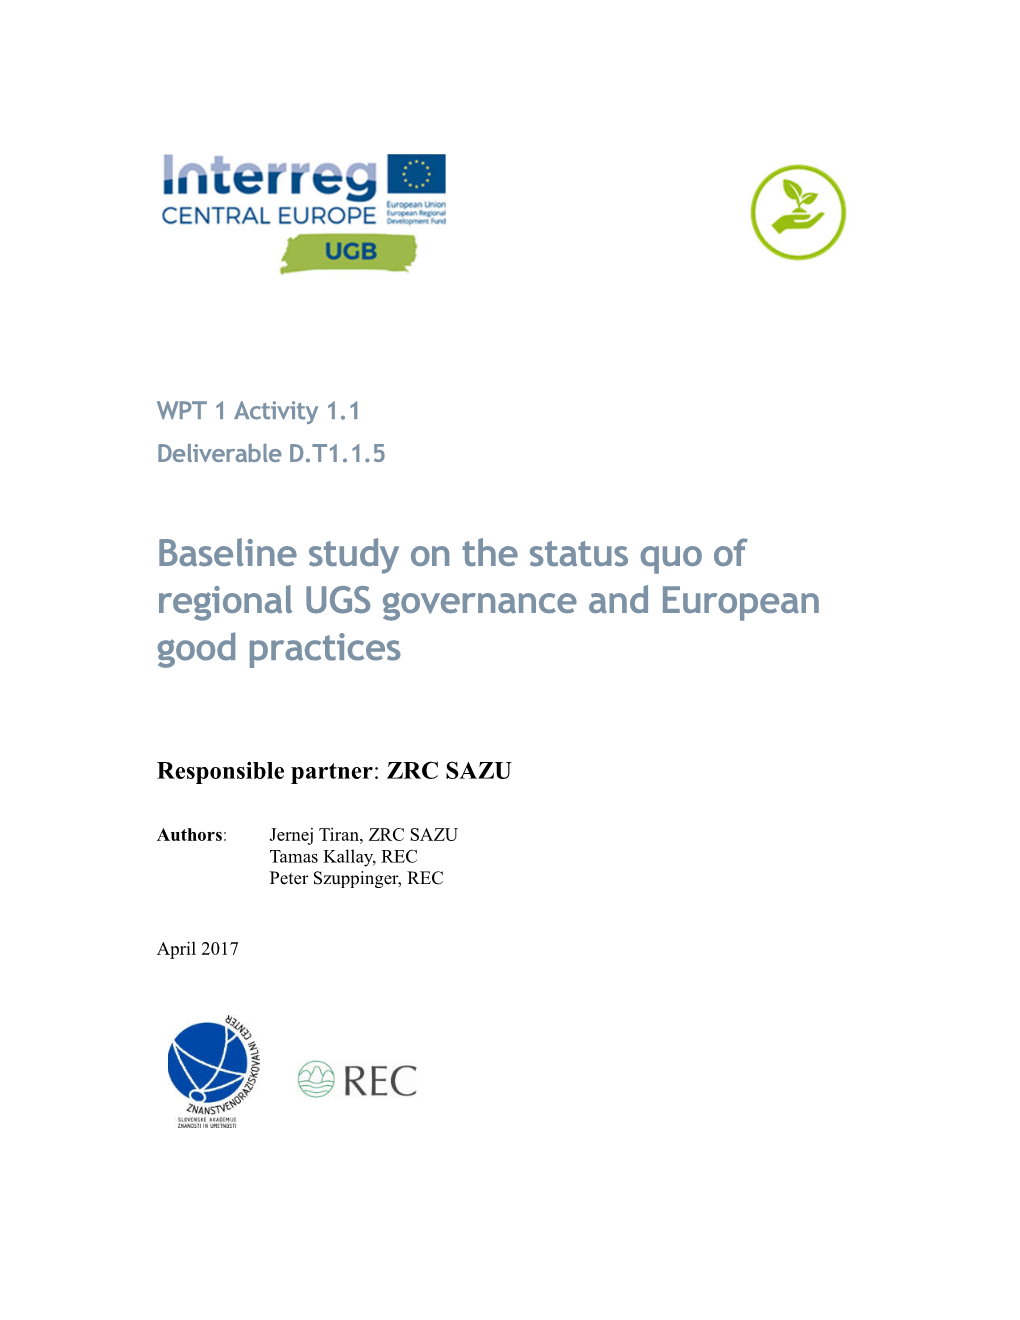 Baseline Study on the Status Quo of Regional UGS Governance and European Good Practices